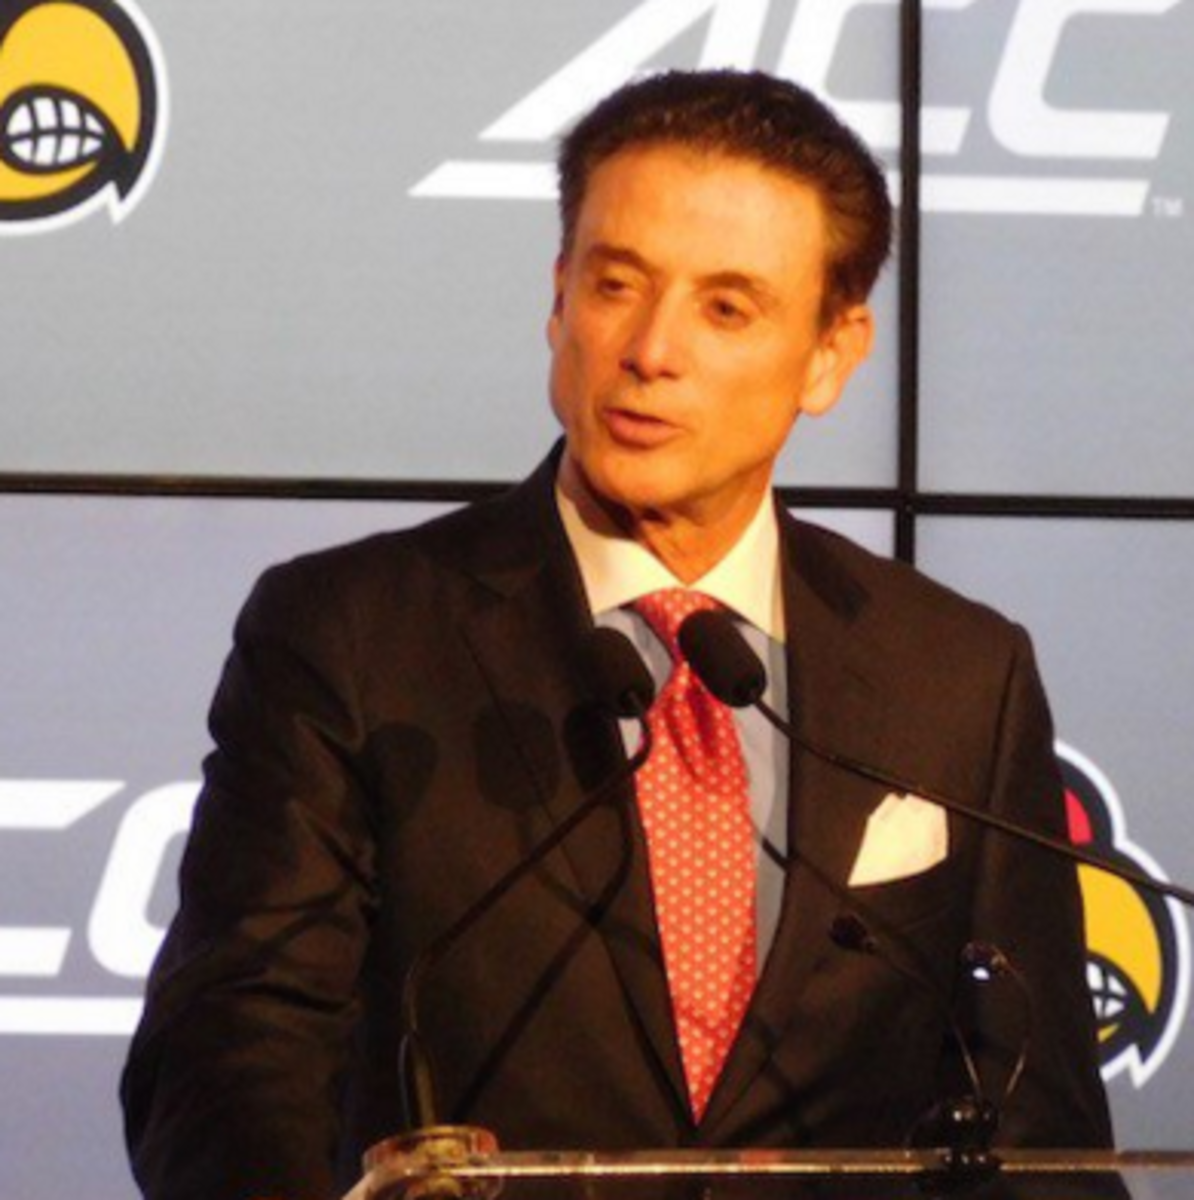 Rick Pitino of Louisville at a press conference.